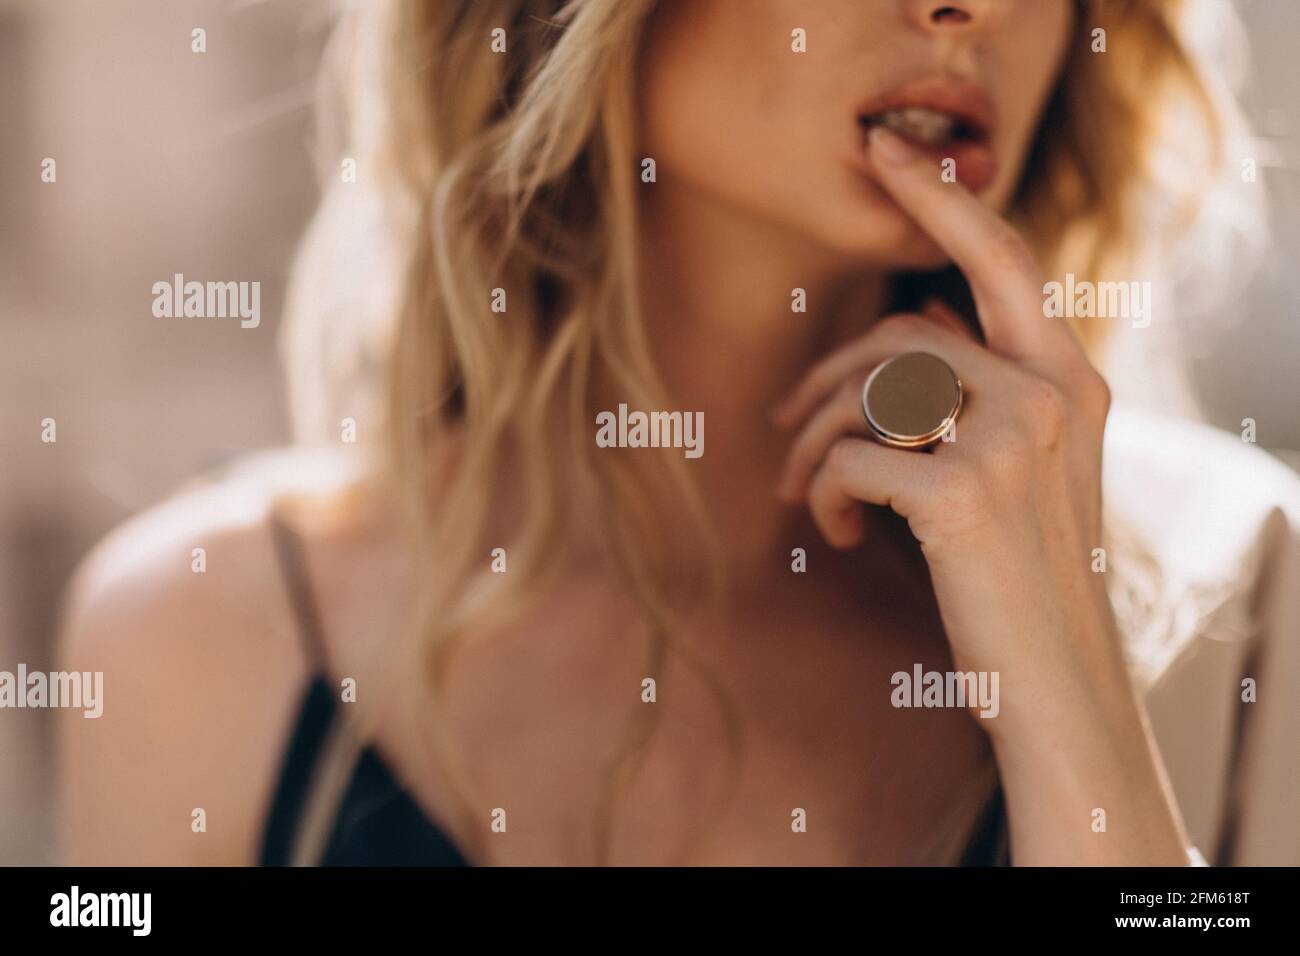 Defocused art portrait of a beautiful blonde woman through the glass in beige tinting. Out of focus Stock Photo